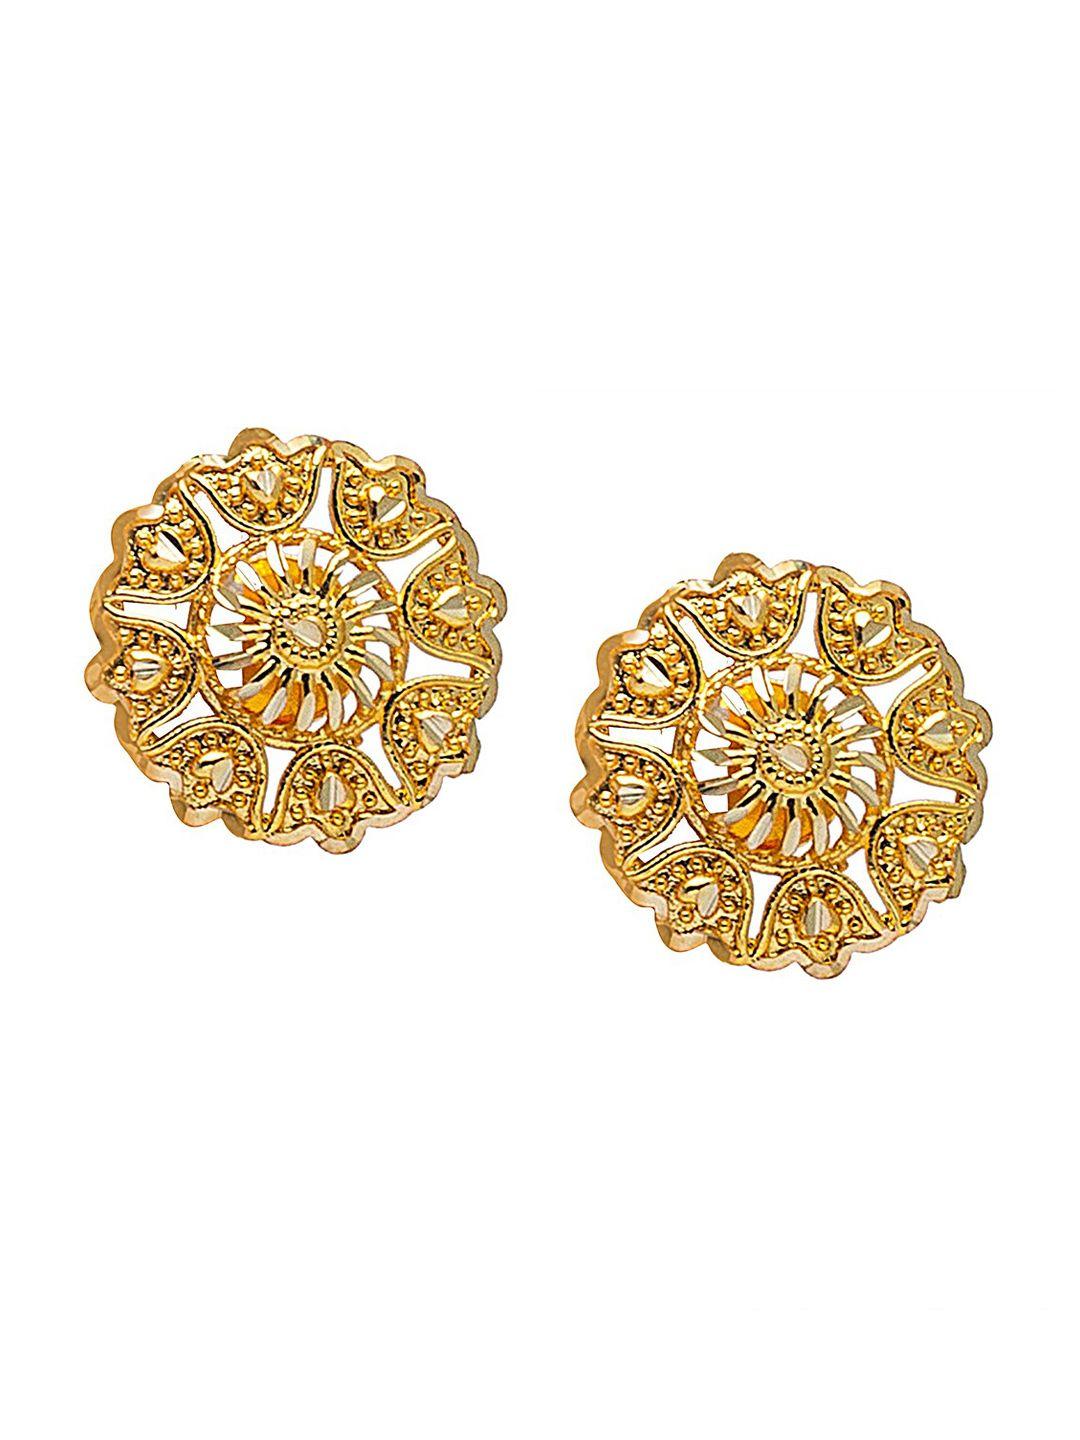 shining jewel - by shivansh gold-plated contemporary studs earrings